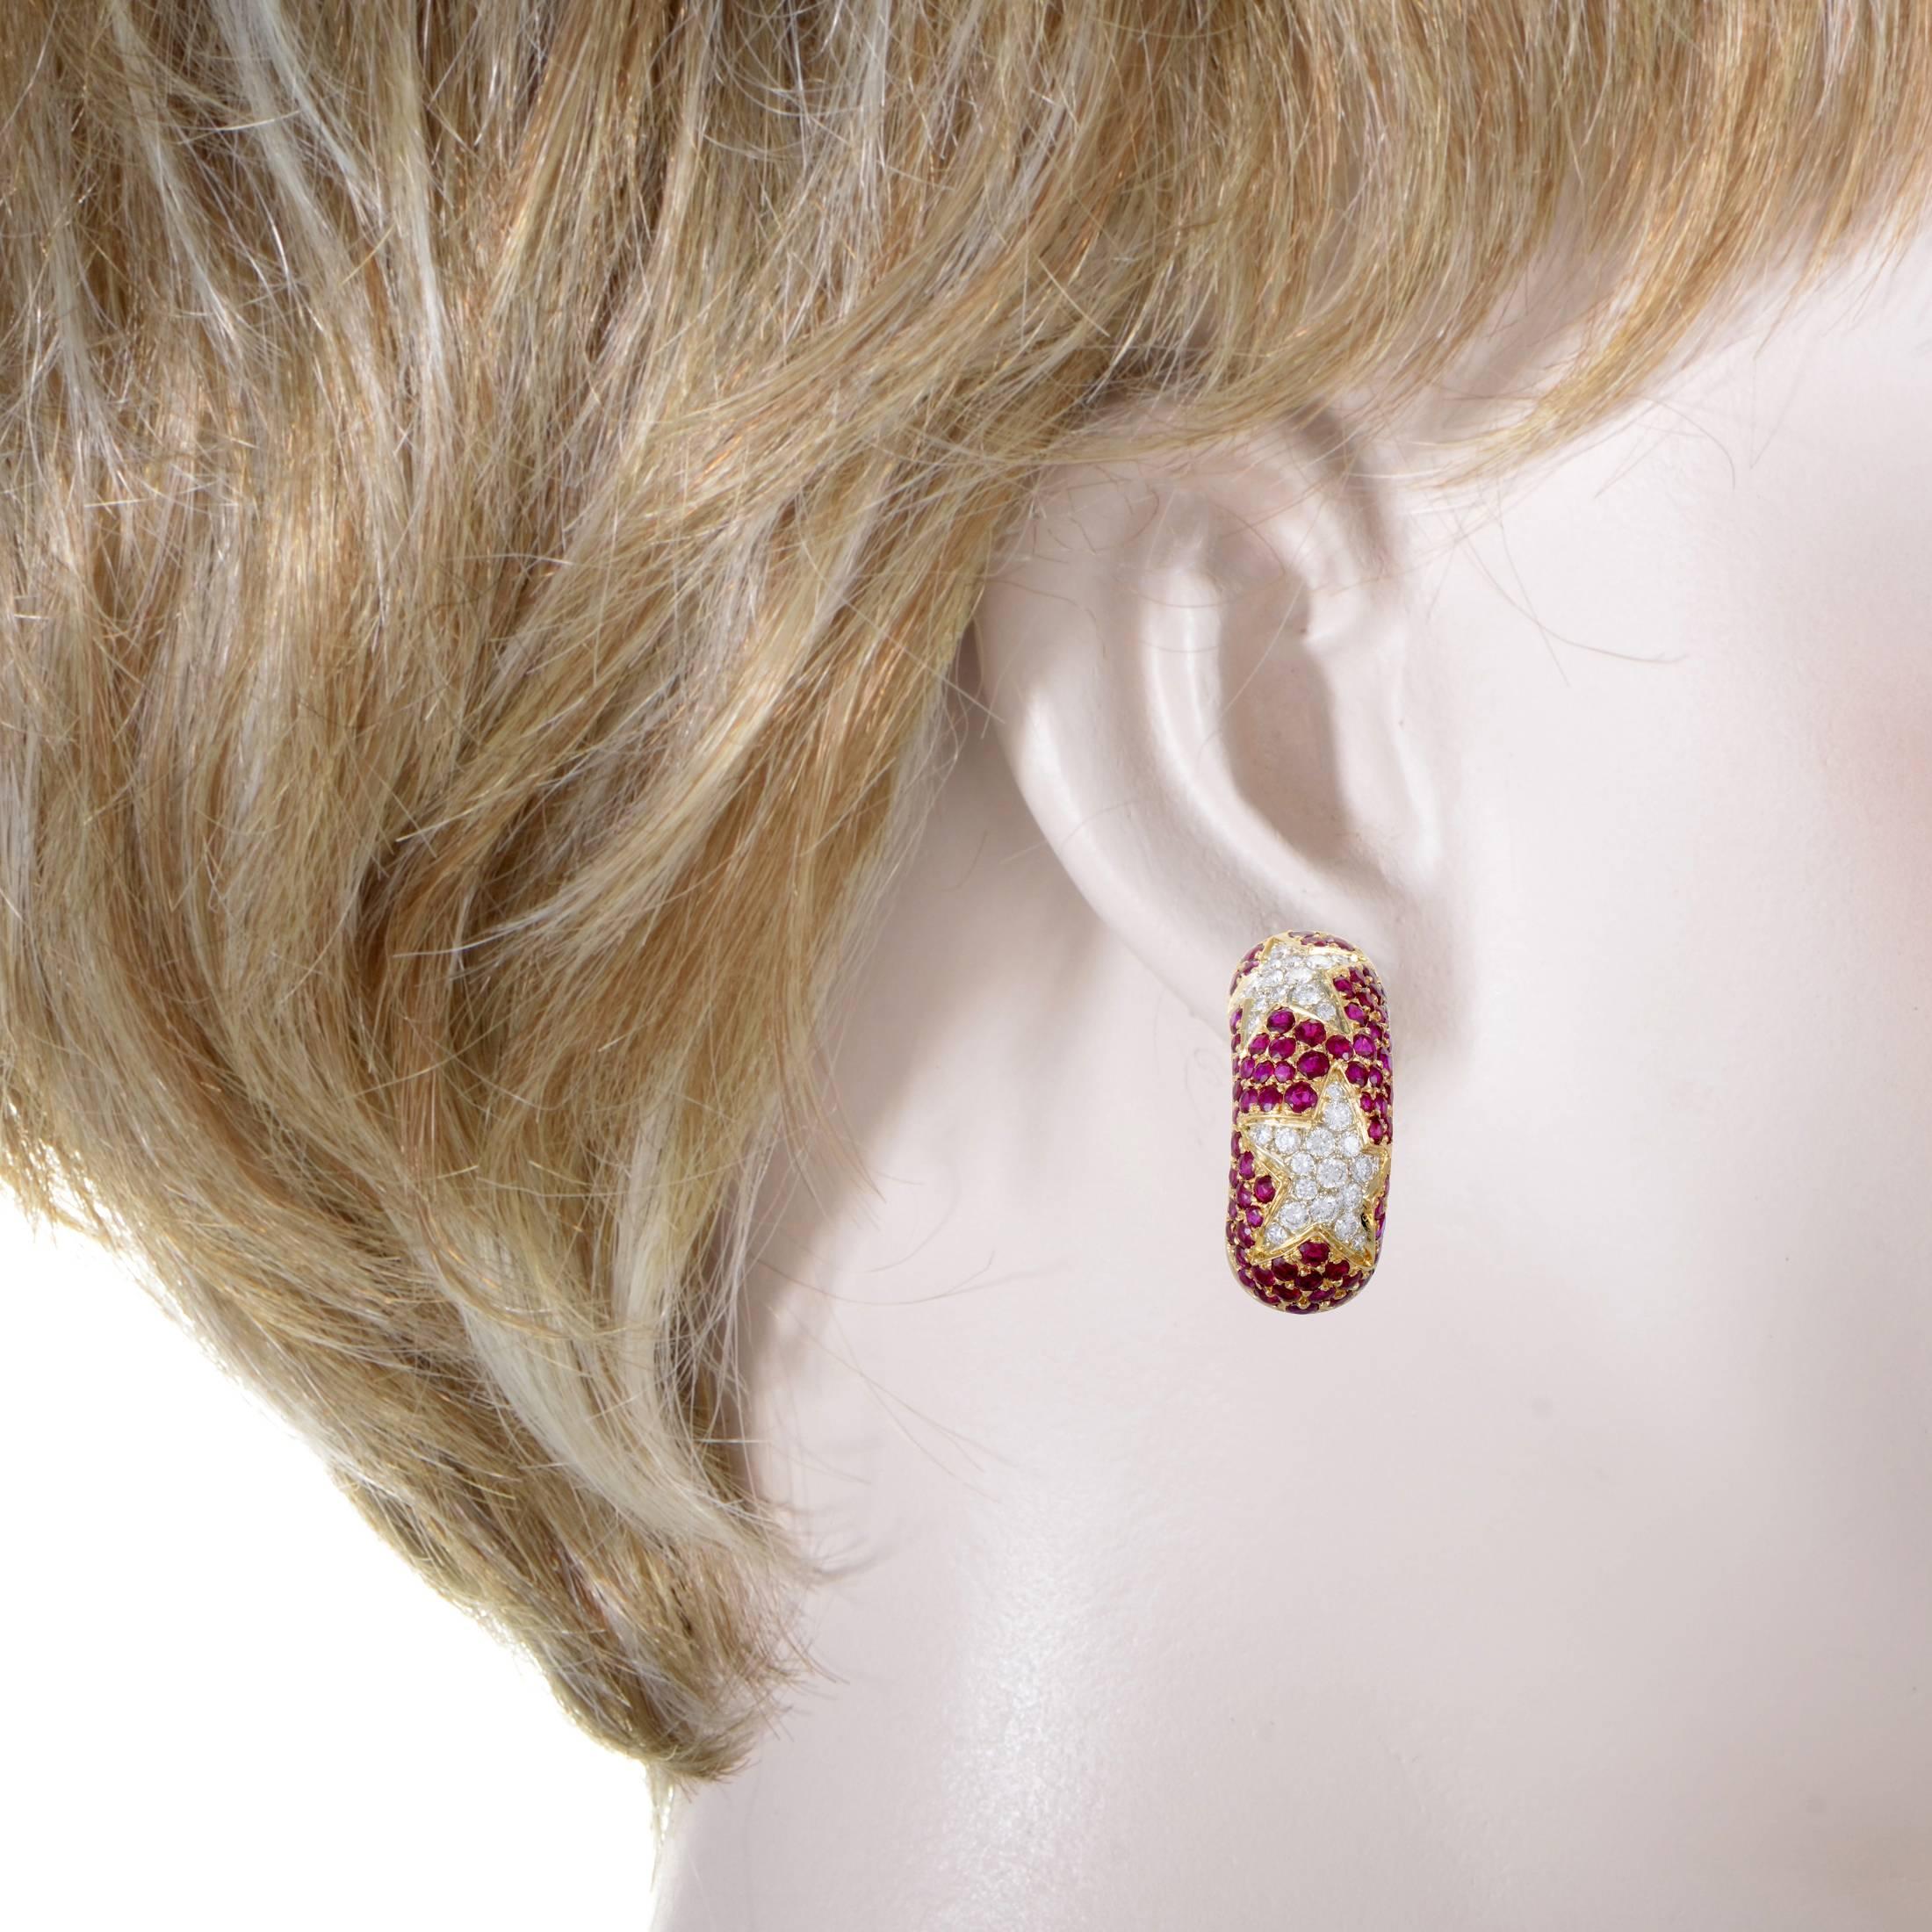 Set amidst fabulous seas of romantic rubies which weigh in total 3.90 carats, glistening diamonds amounting to 1.80 carats are arranged in the compelling form of stars in these spellbinding 18K yellow gold earrings from Chaumet.